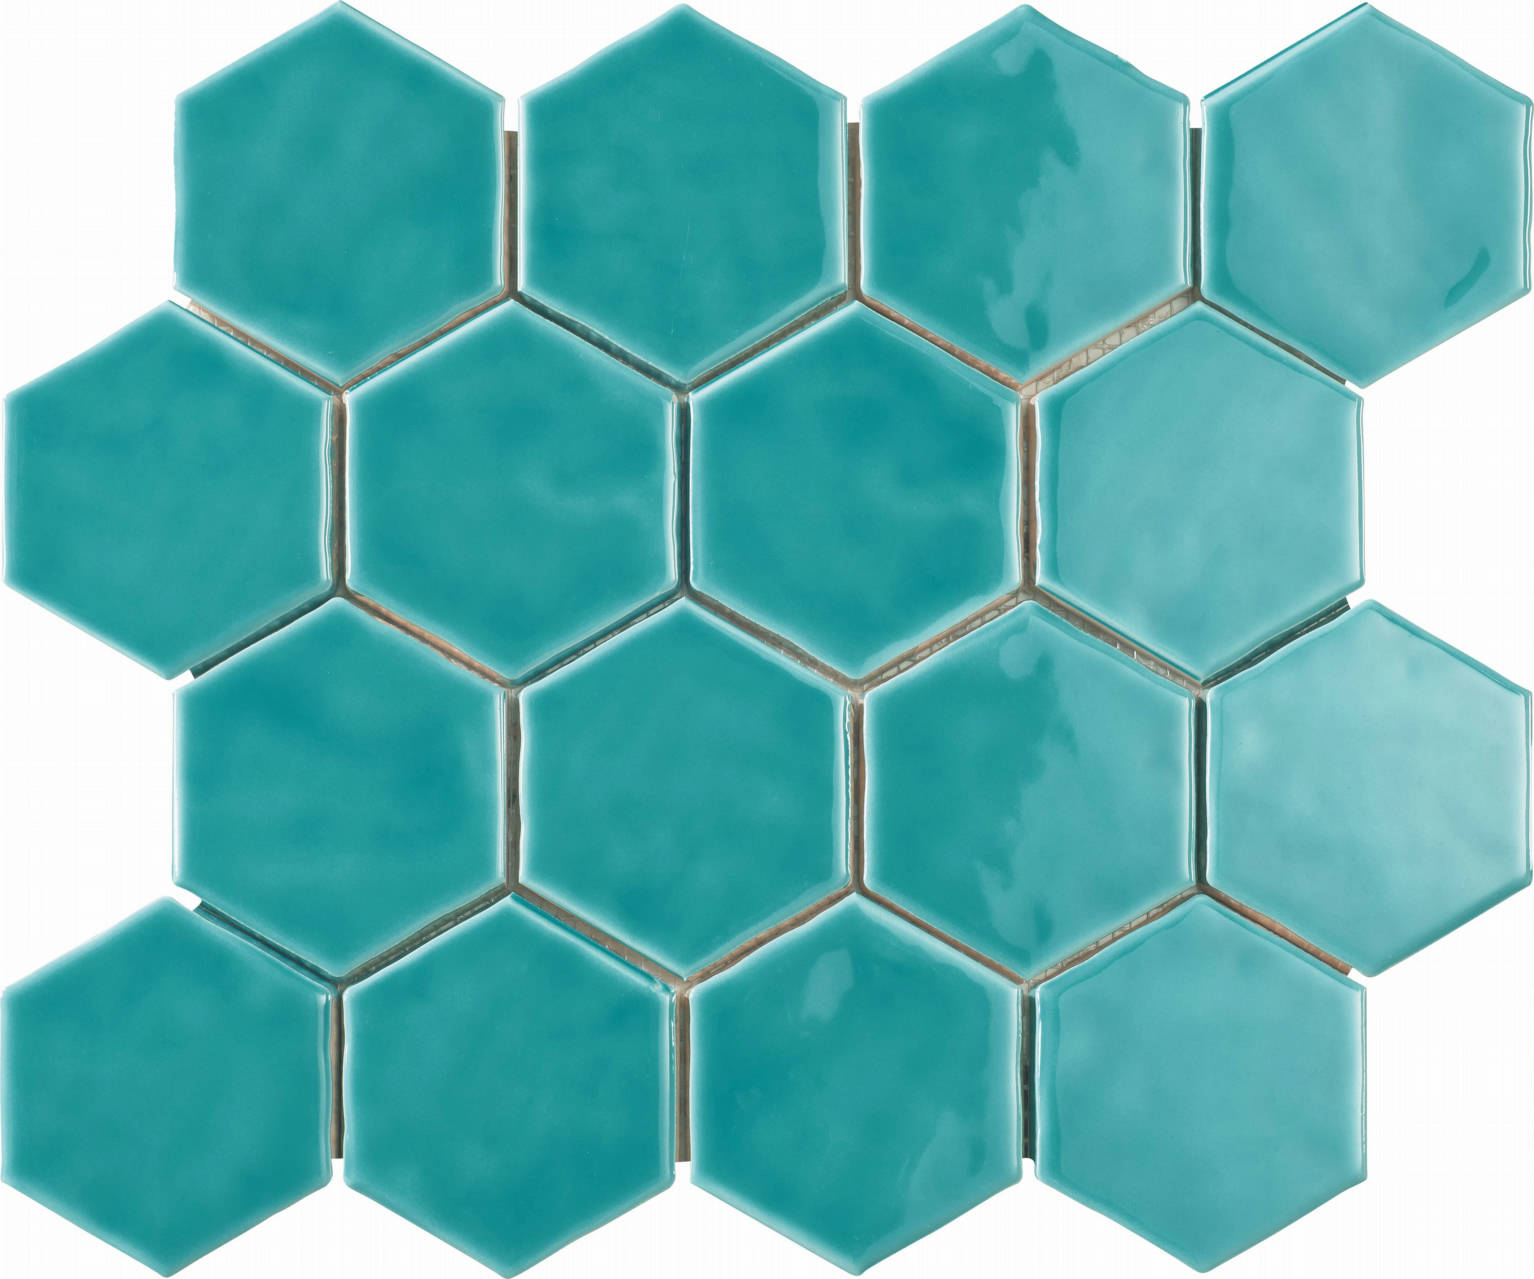 Aquamarine Glossy | Stones And More | Finest selection of Mosaics, Glass, Tile and Stone